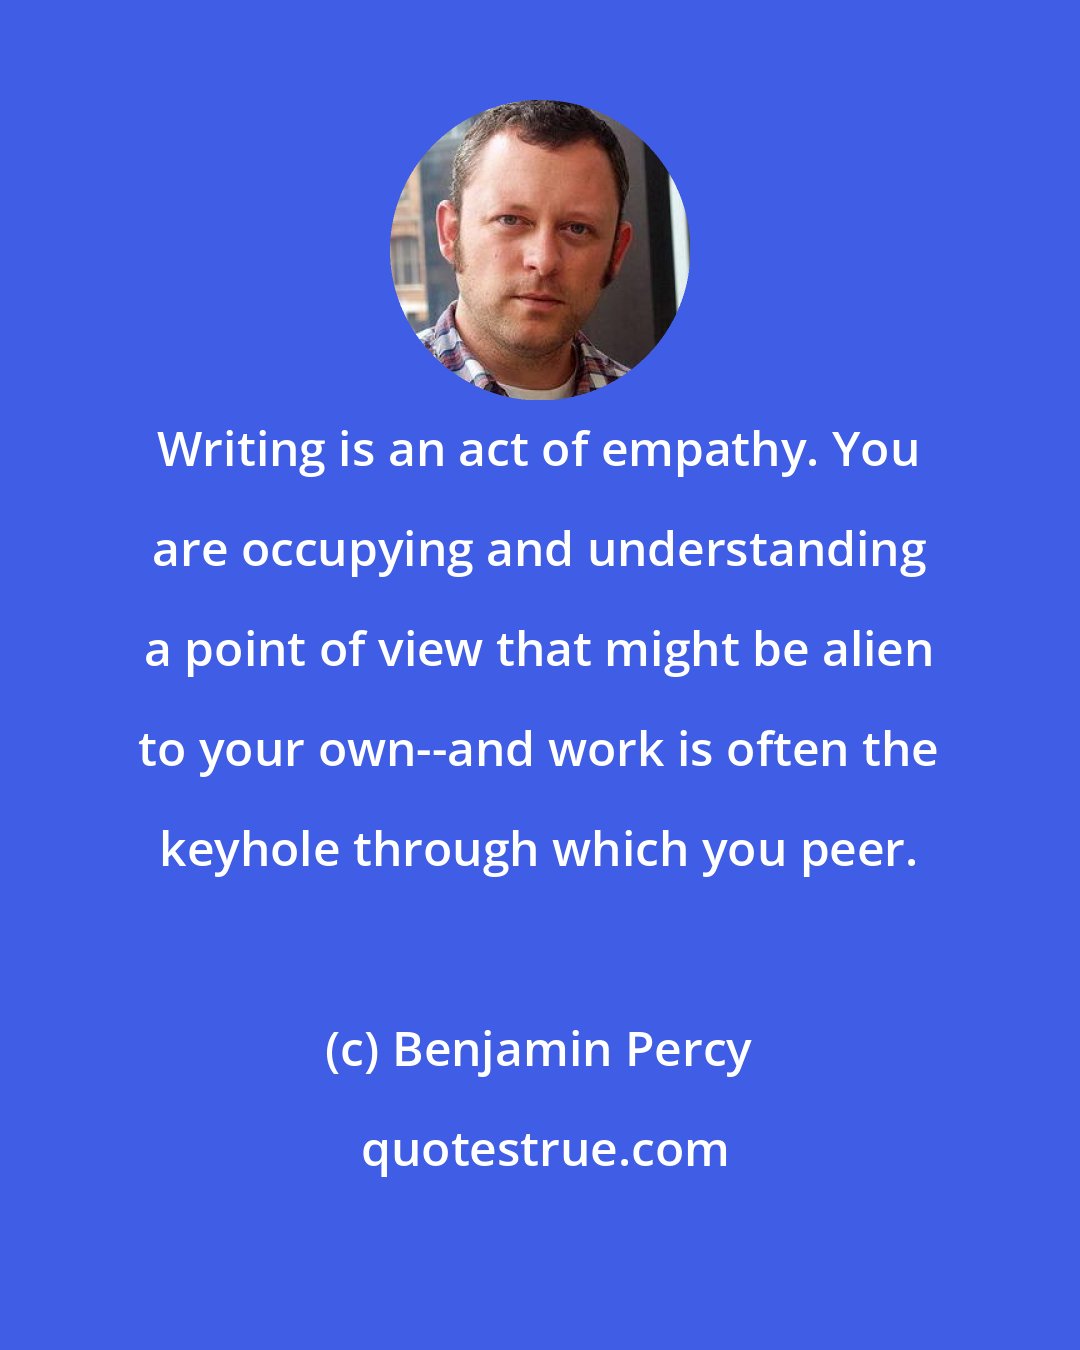 Benjamin Percy: Writing is an act of empathy. You are occupying and understanding a point of view that might be alien to your own--and work is often the keyhole through which you peer.